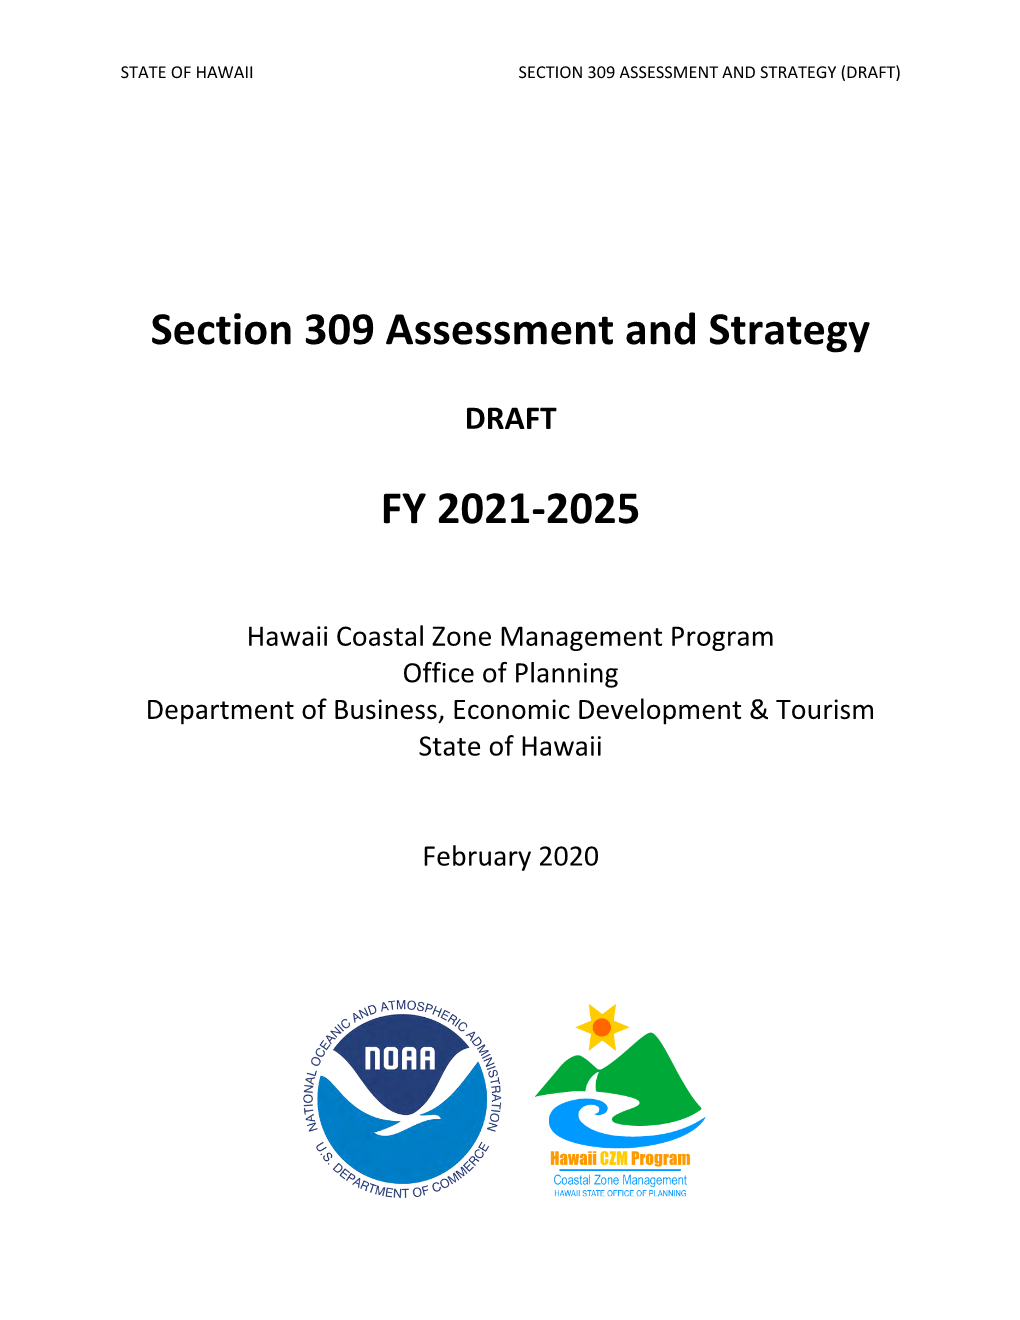 Section 309 Assessment and Strategy FY 2021-2025